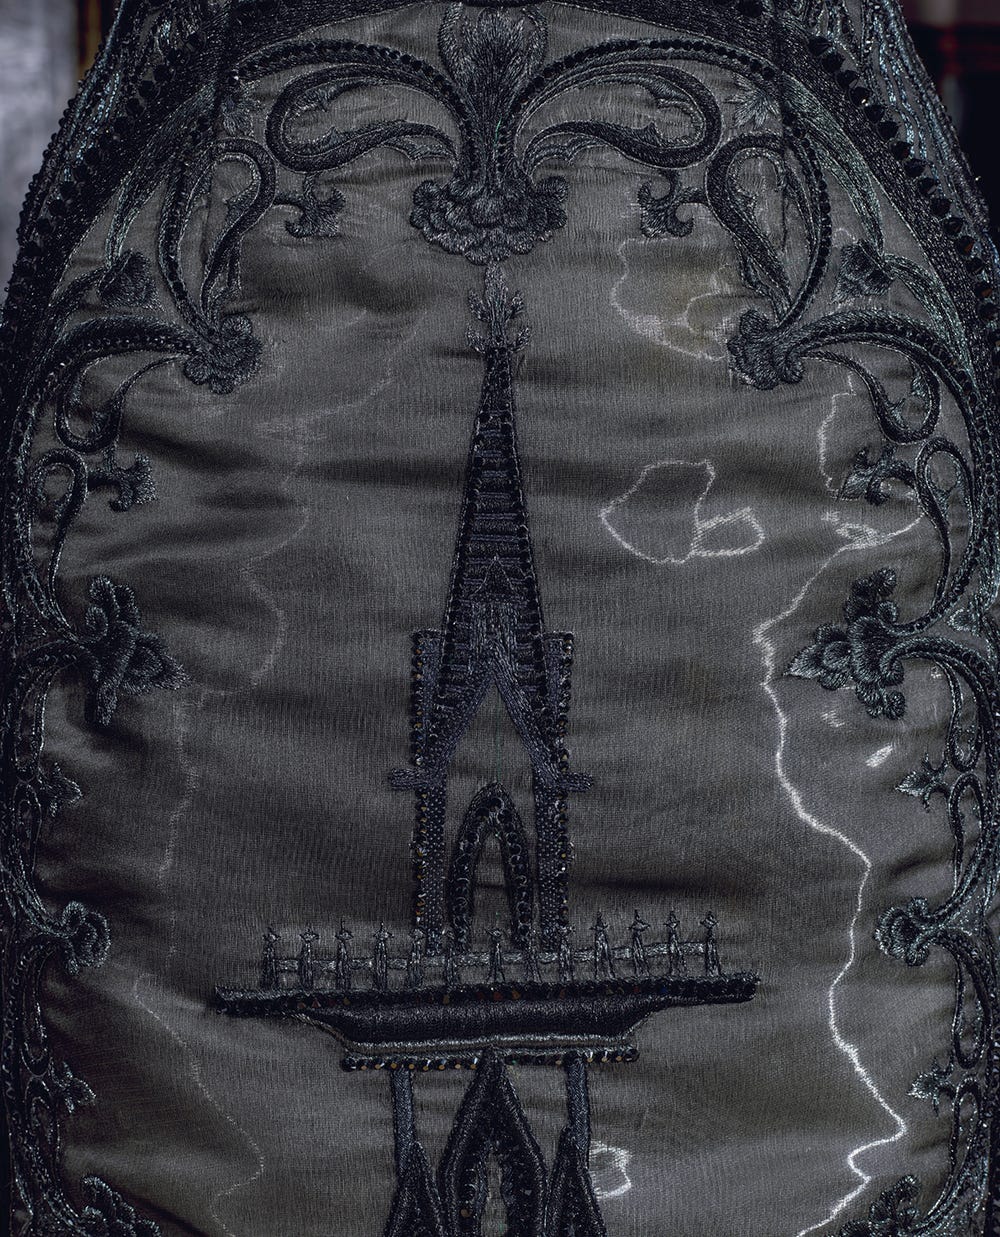 tower embroidered on a black couture dress